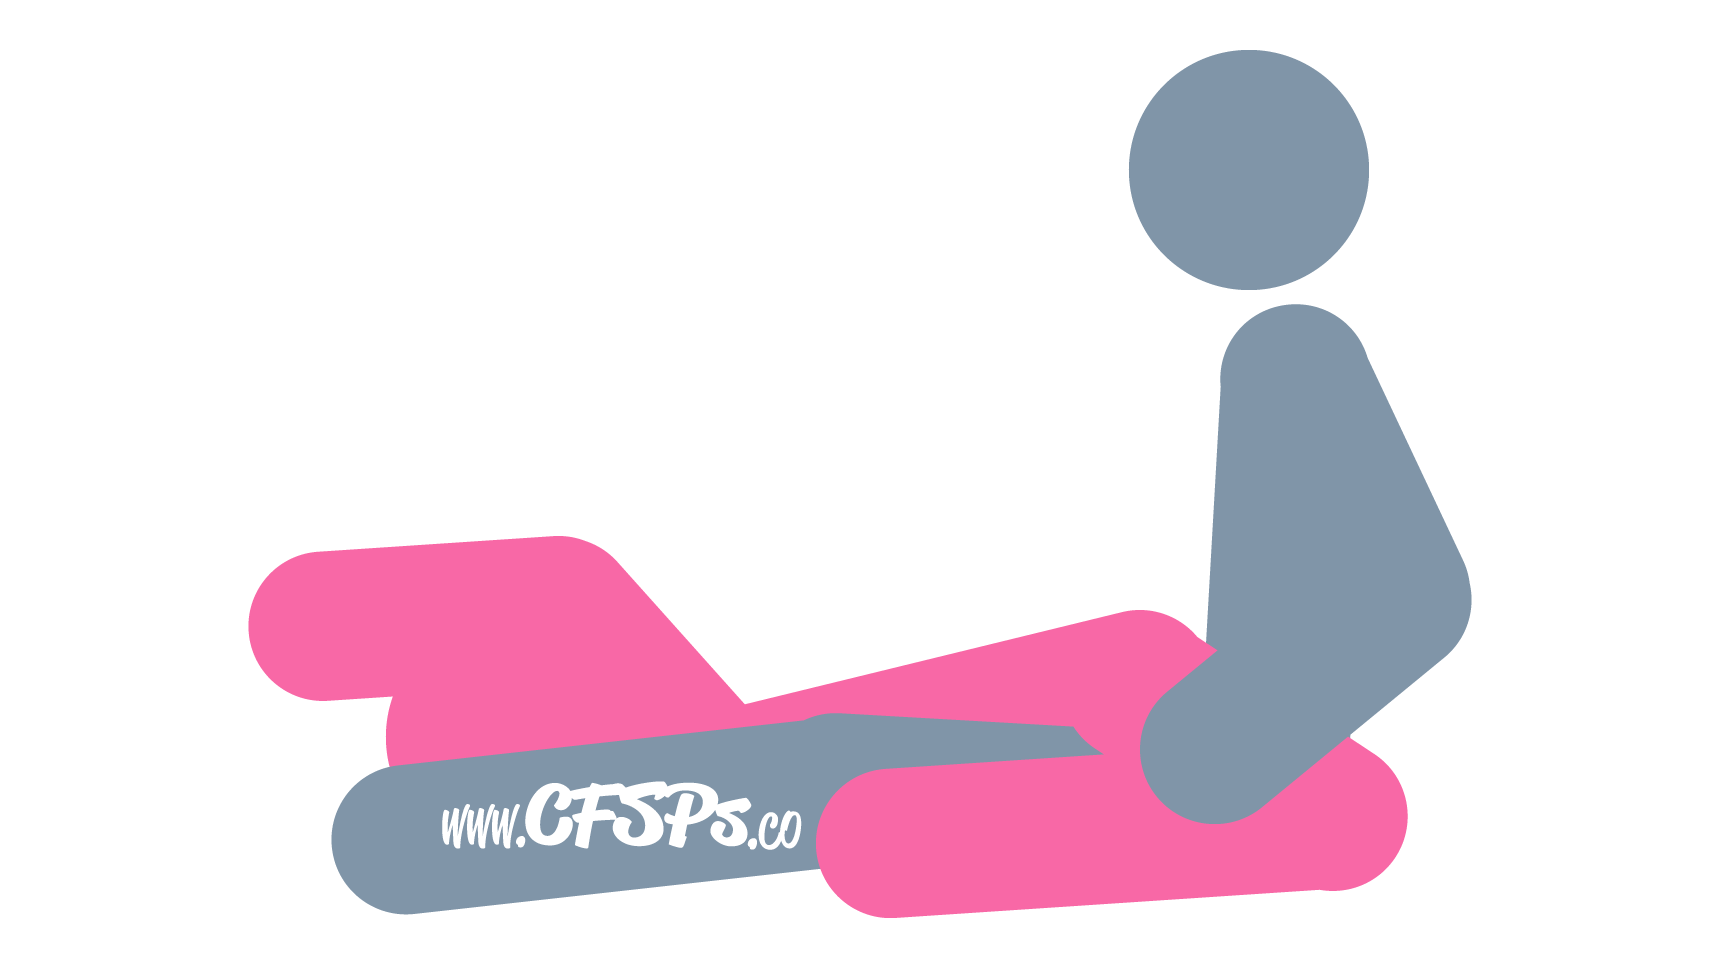 This stick figure image depicts a man and woman having sex in the Exposed Eagle sex position. The man is sitting with his legs open and straight out. The woman is straddling his pelvis with her knees on the bed just behind his butt and lying back on the bed between his legs.